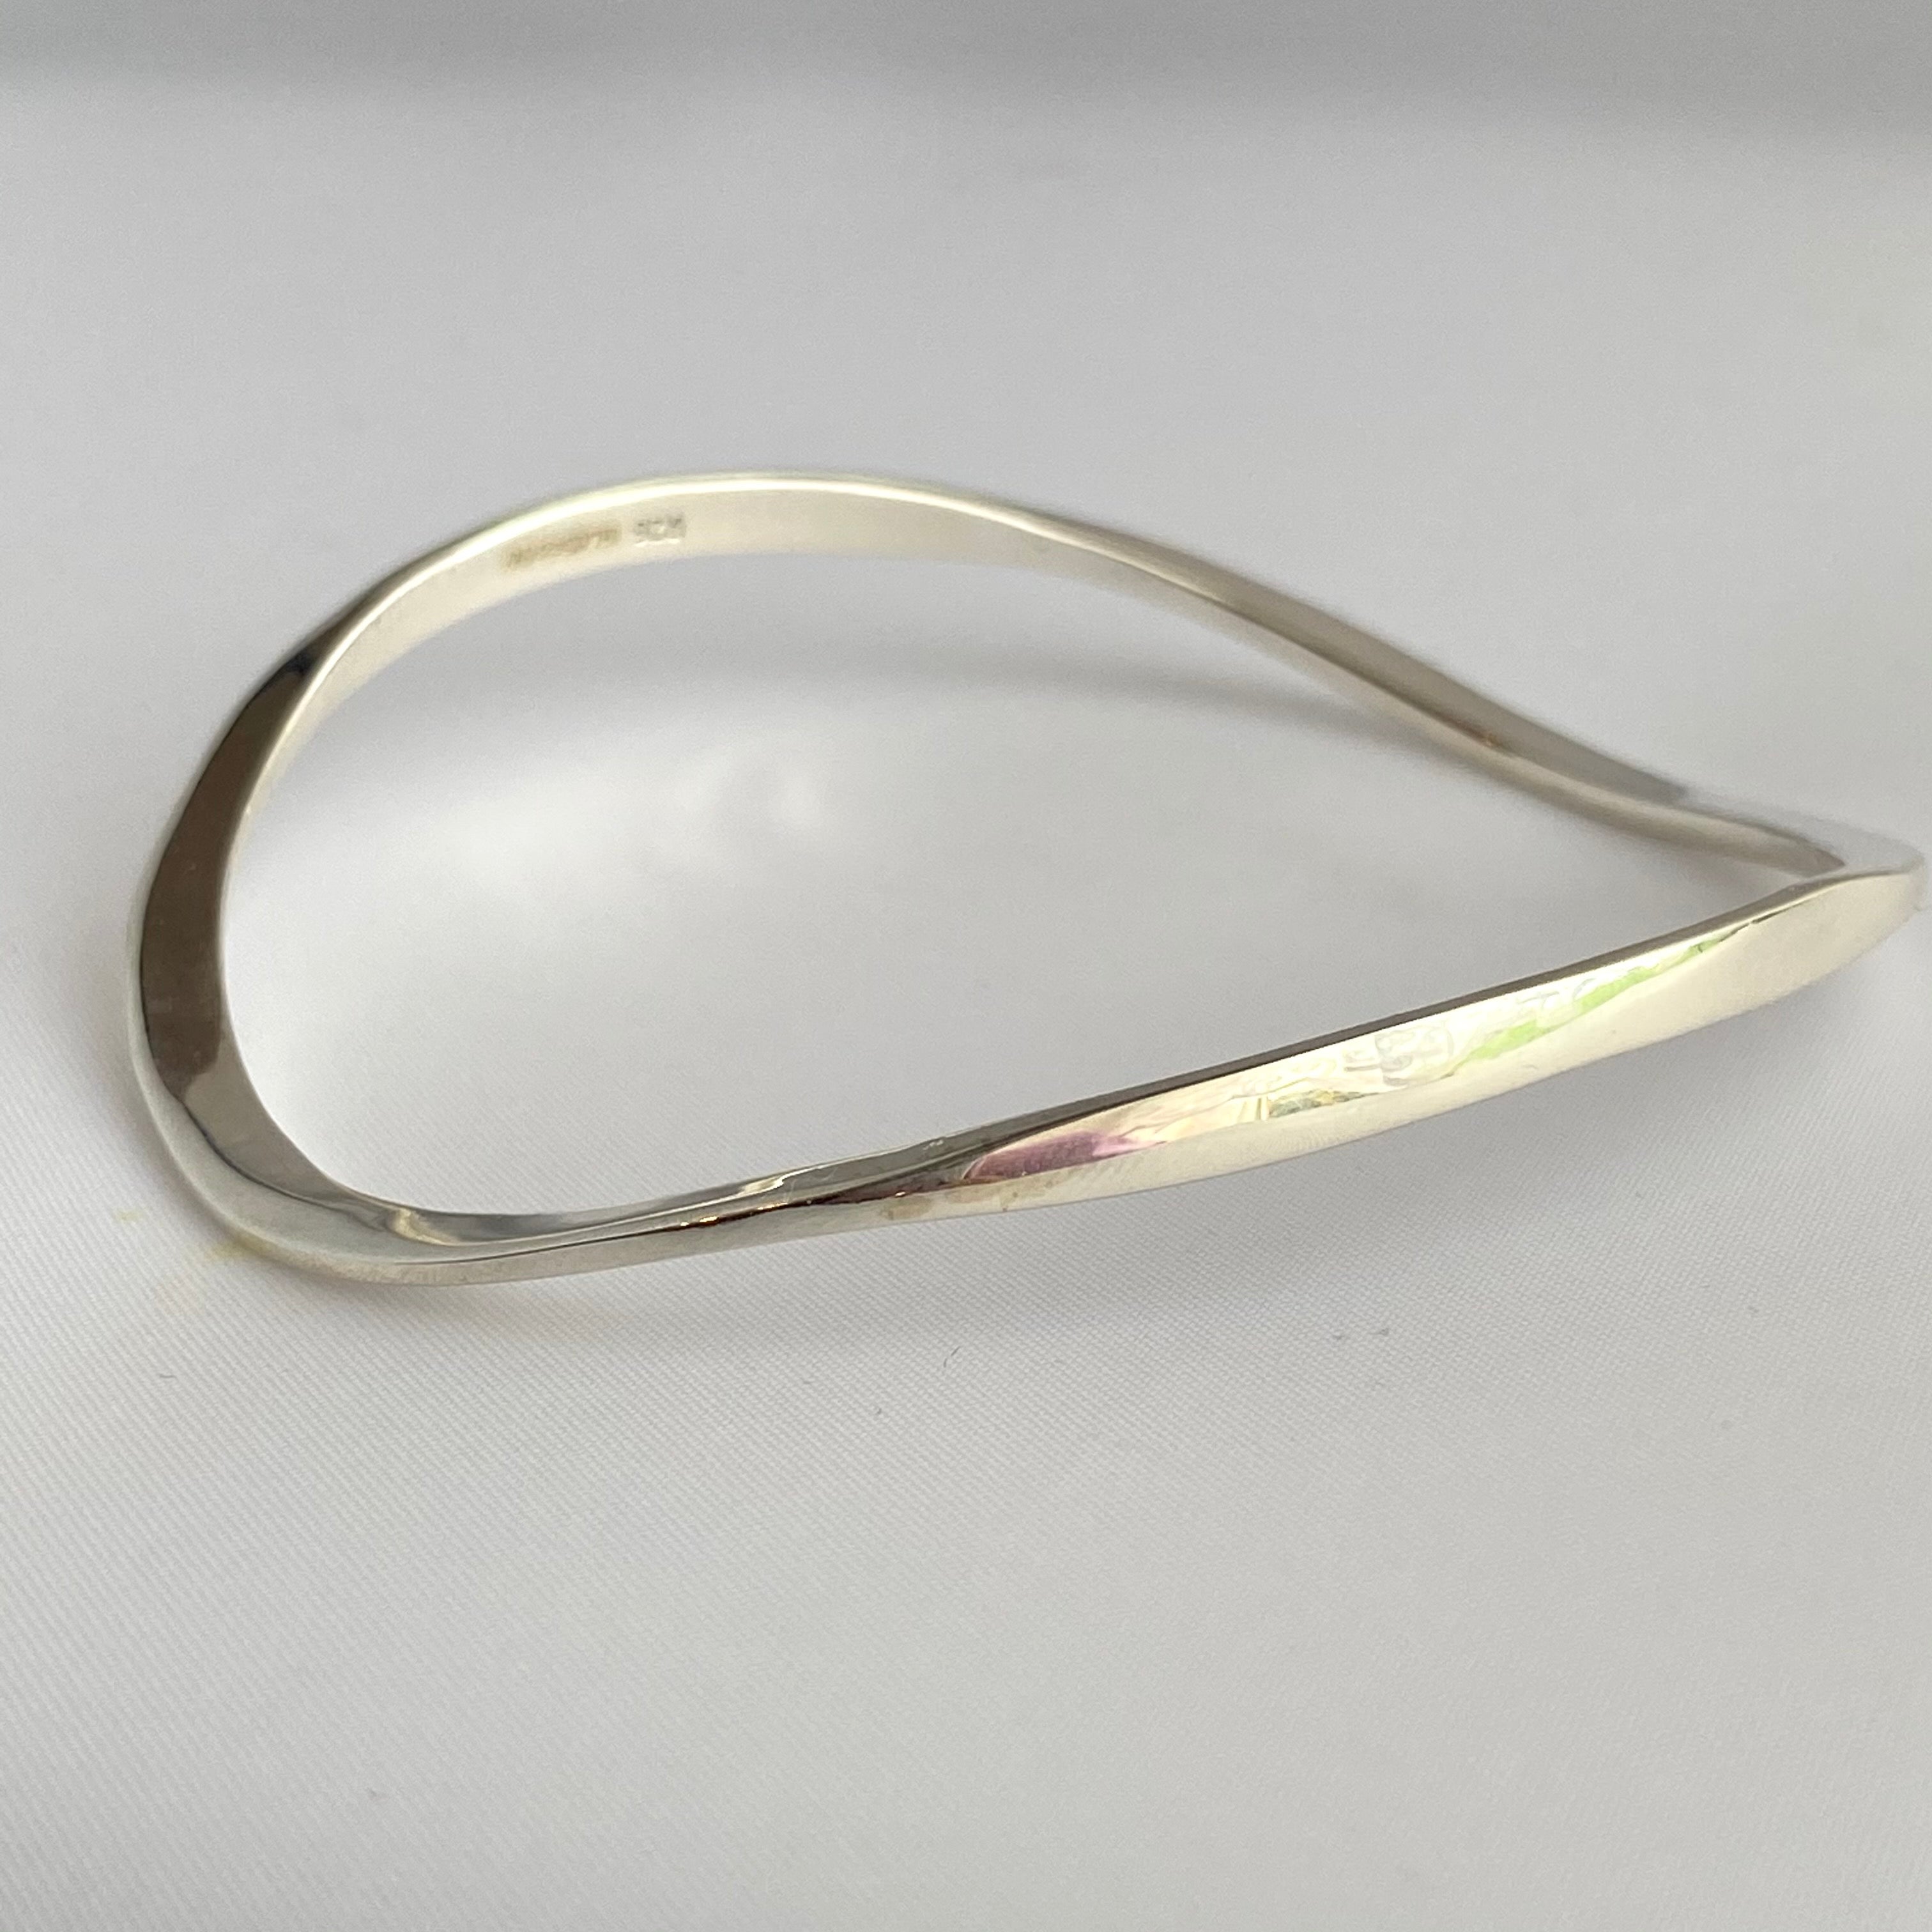 Sterling Silver Wavy Bangle with a Slightly Triangular Shape